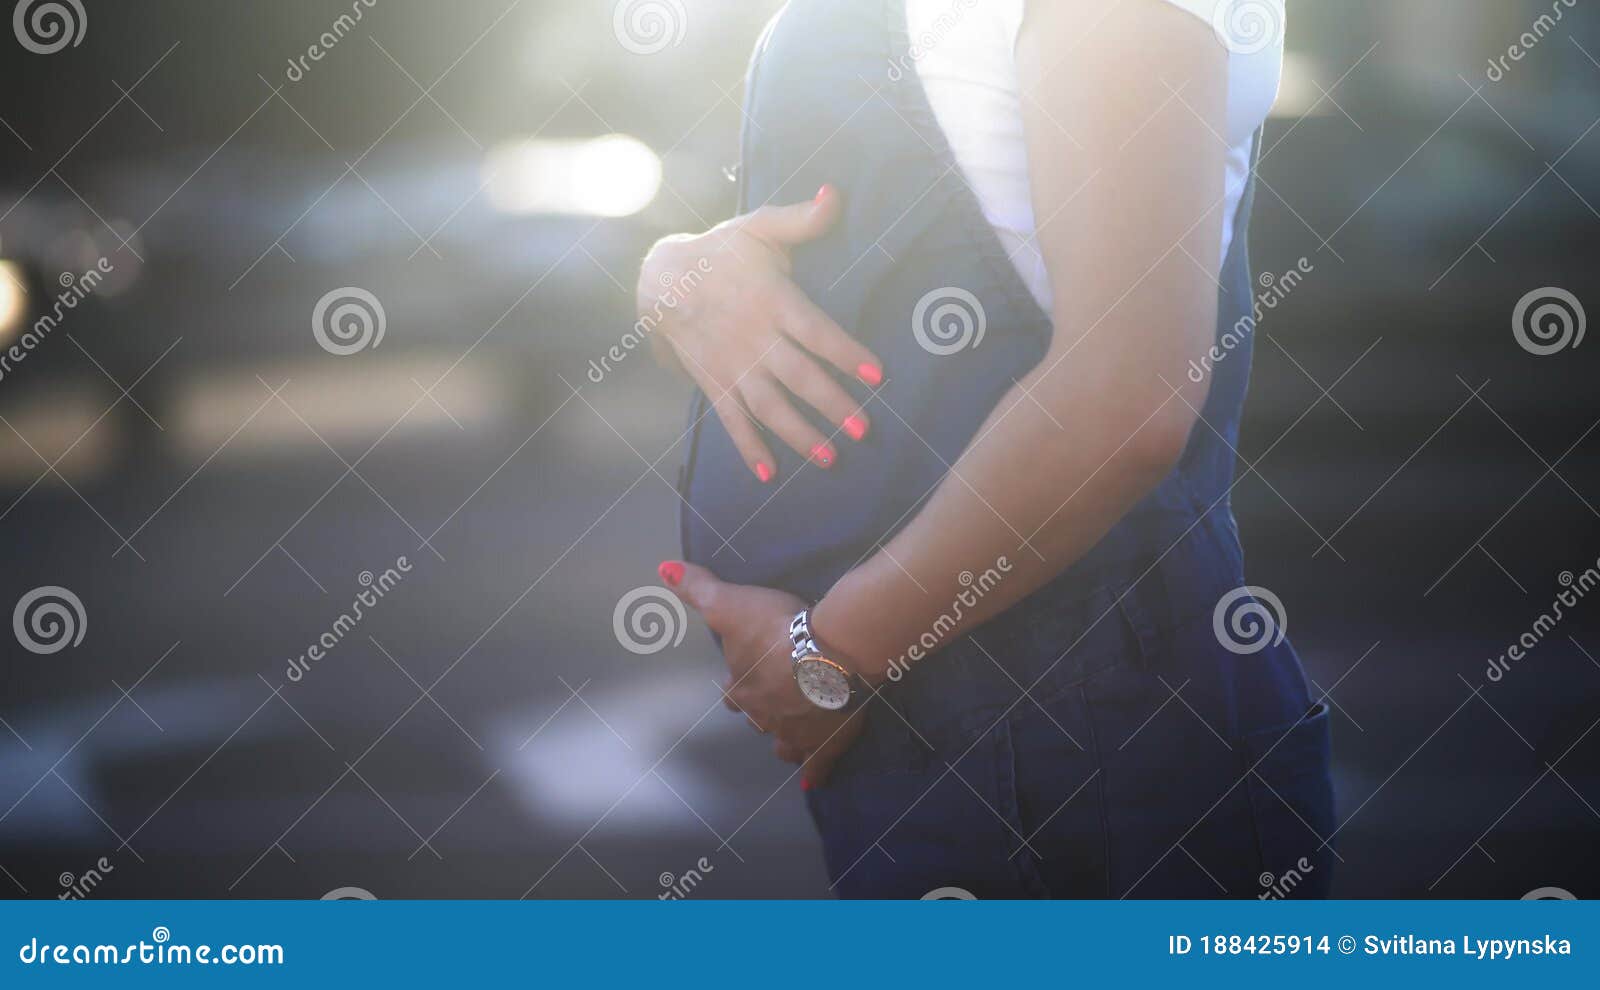 Woman Massaging Her Husband Stock Footage and Videos photo